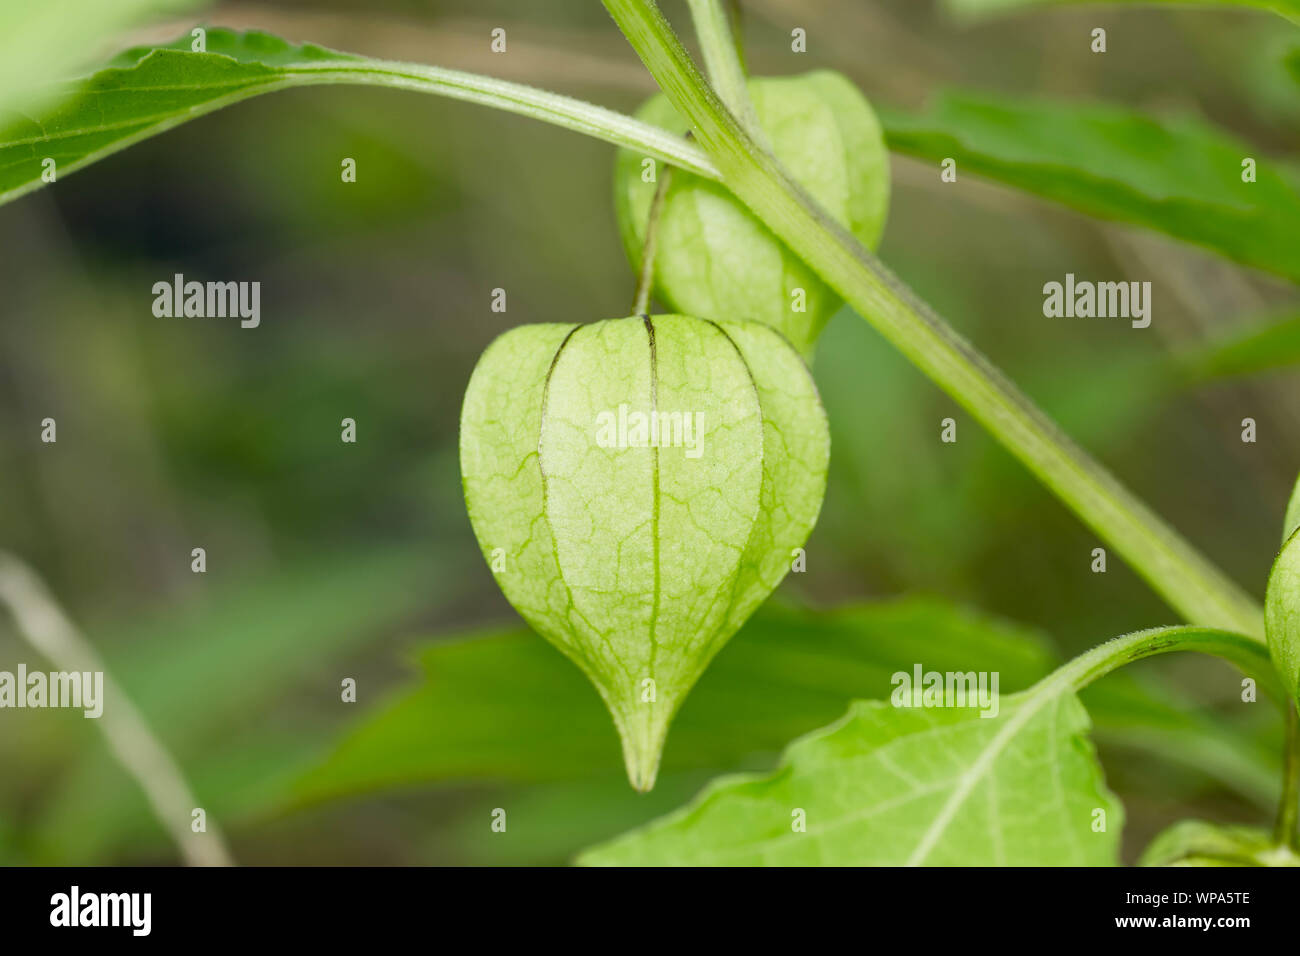 Fresh, unripe, green cape gooseberry still attached to its tree. Hanging cape gooseberries are also known as tino-tino in the Philippines. Stock Photo